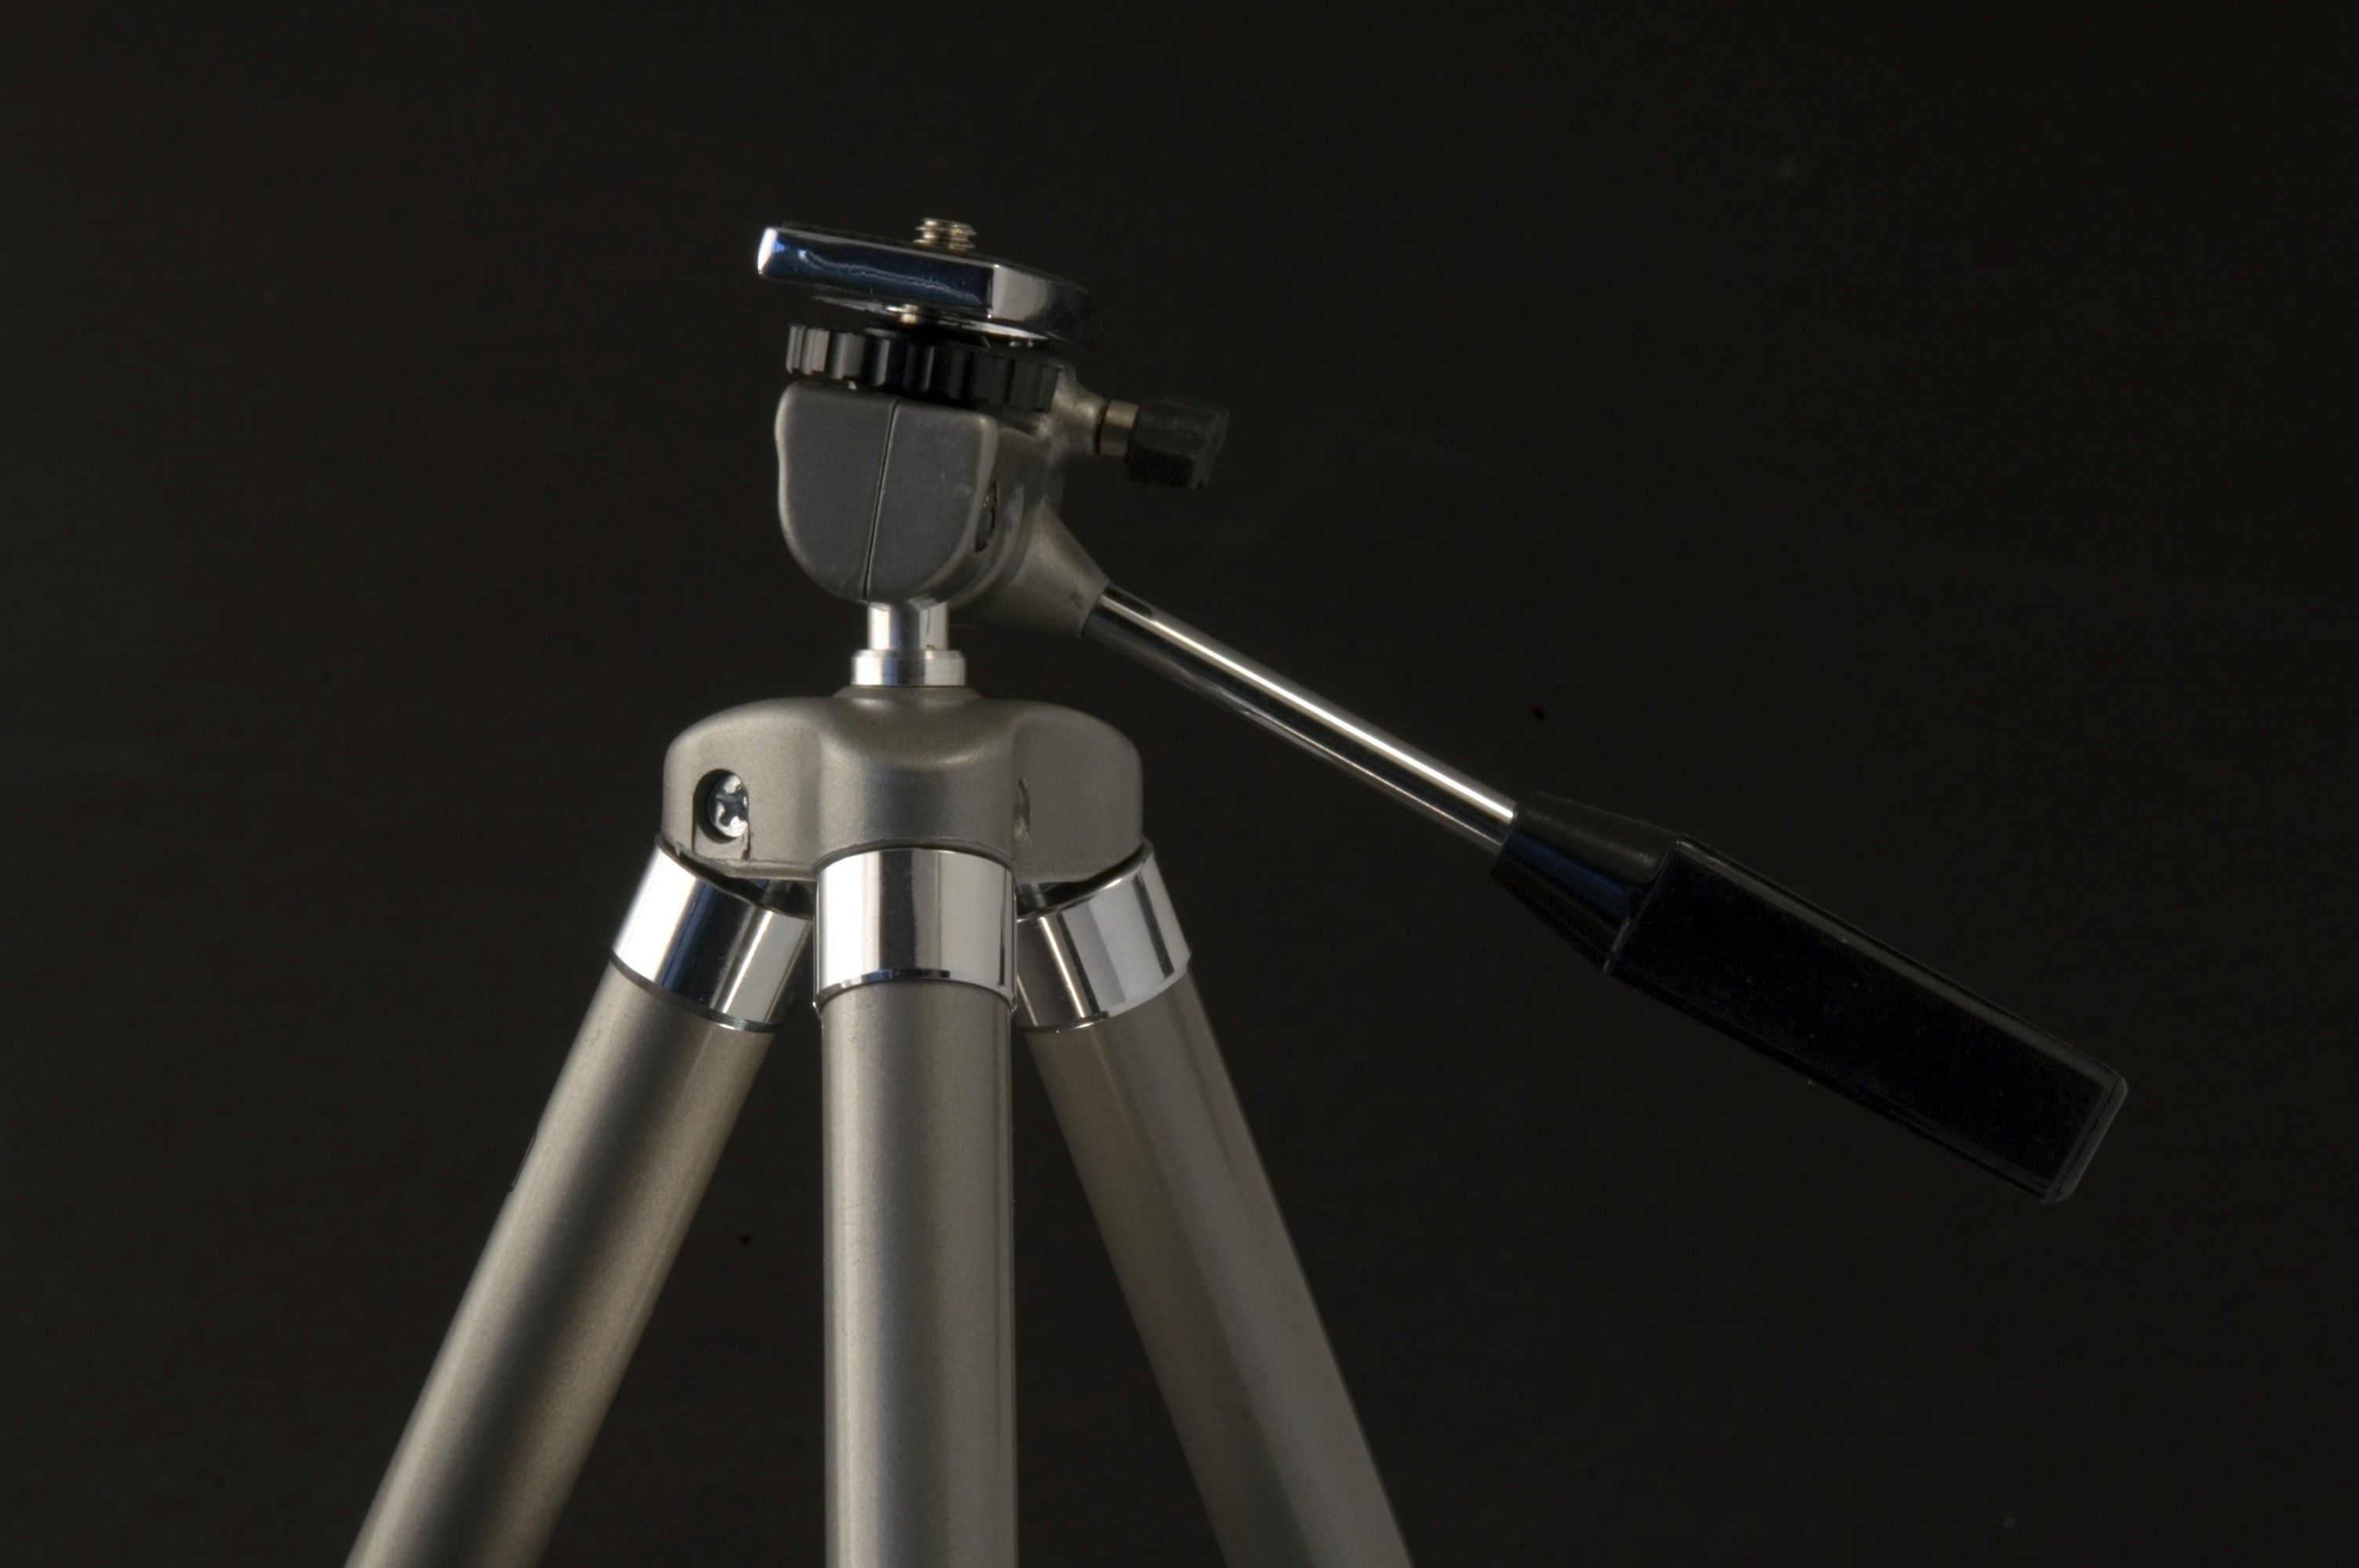 Need to Store Your Tripods & C-Stands? This is a Great, Cheap DIY Solution